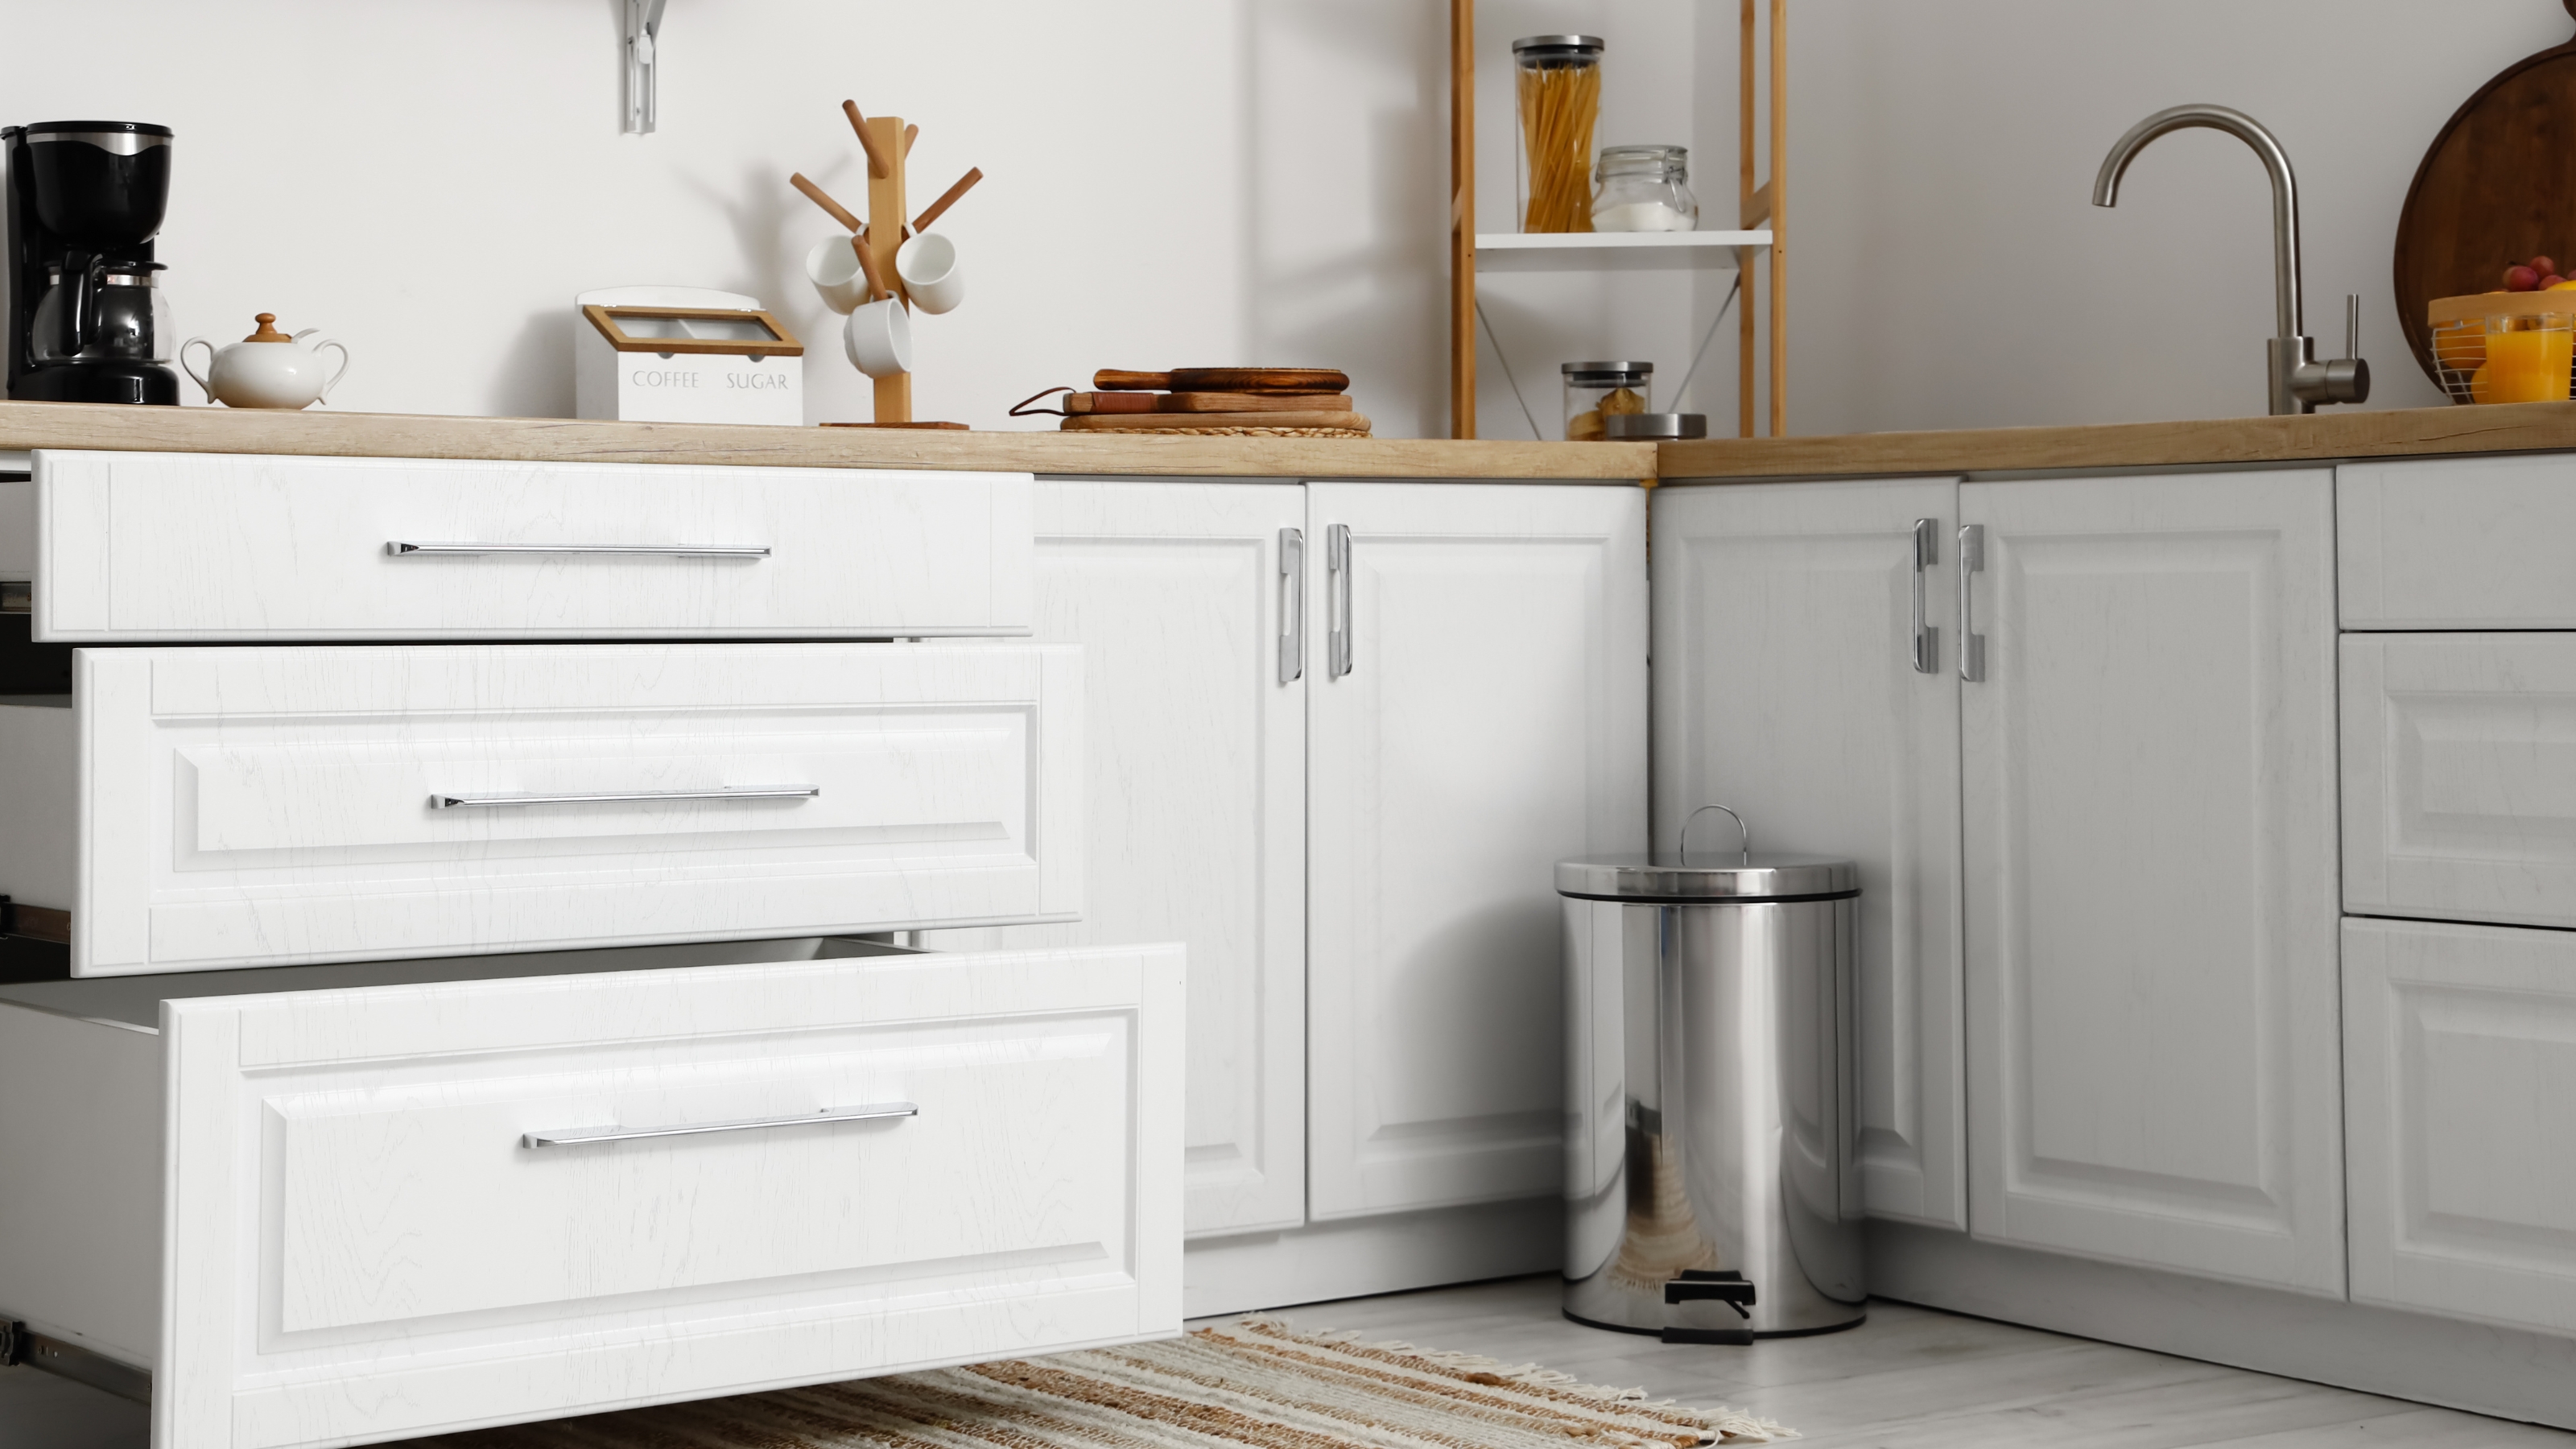 This is where to put a trash can in a small kitchen, according to designers